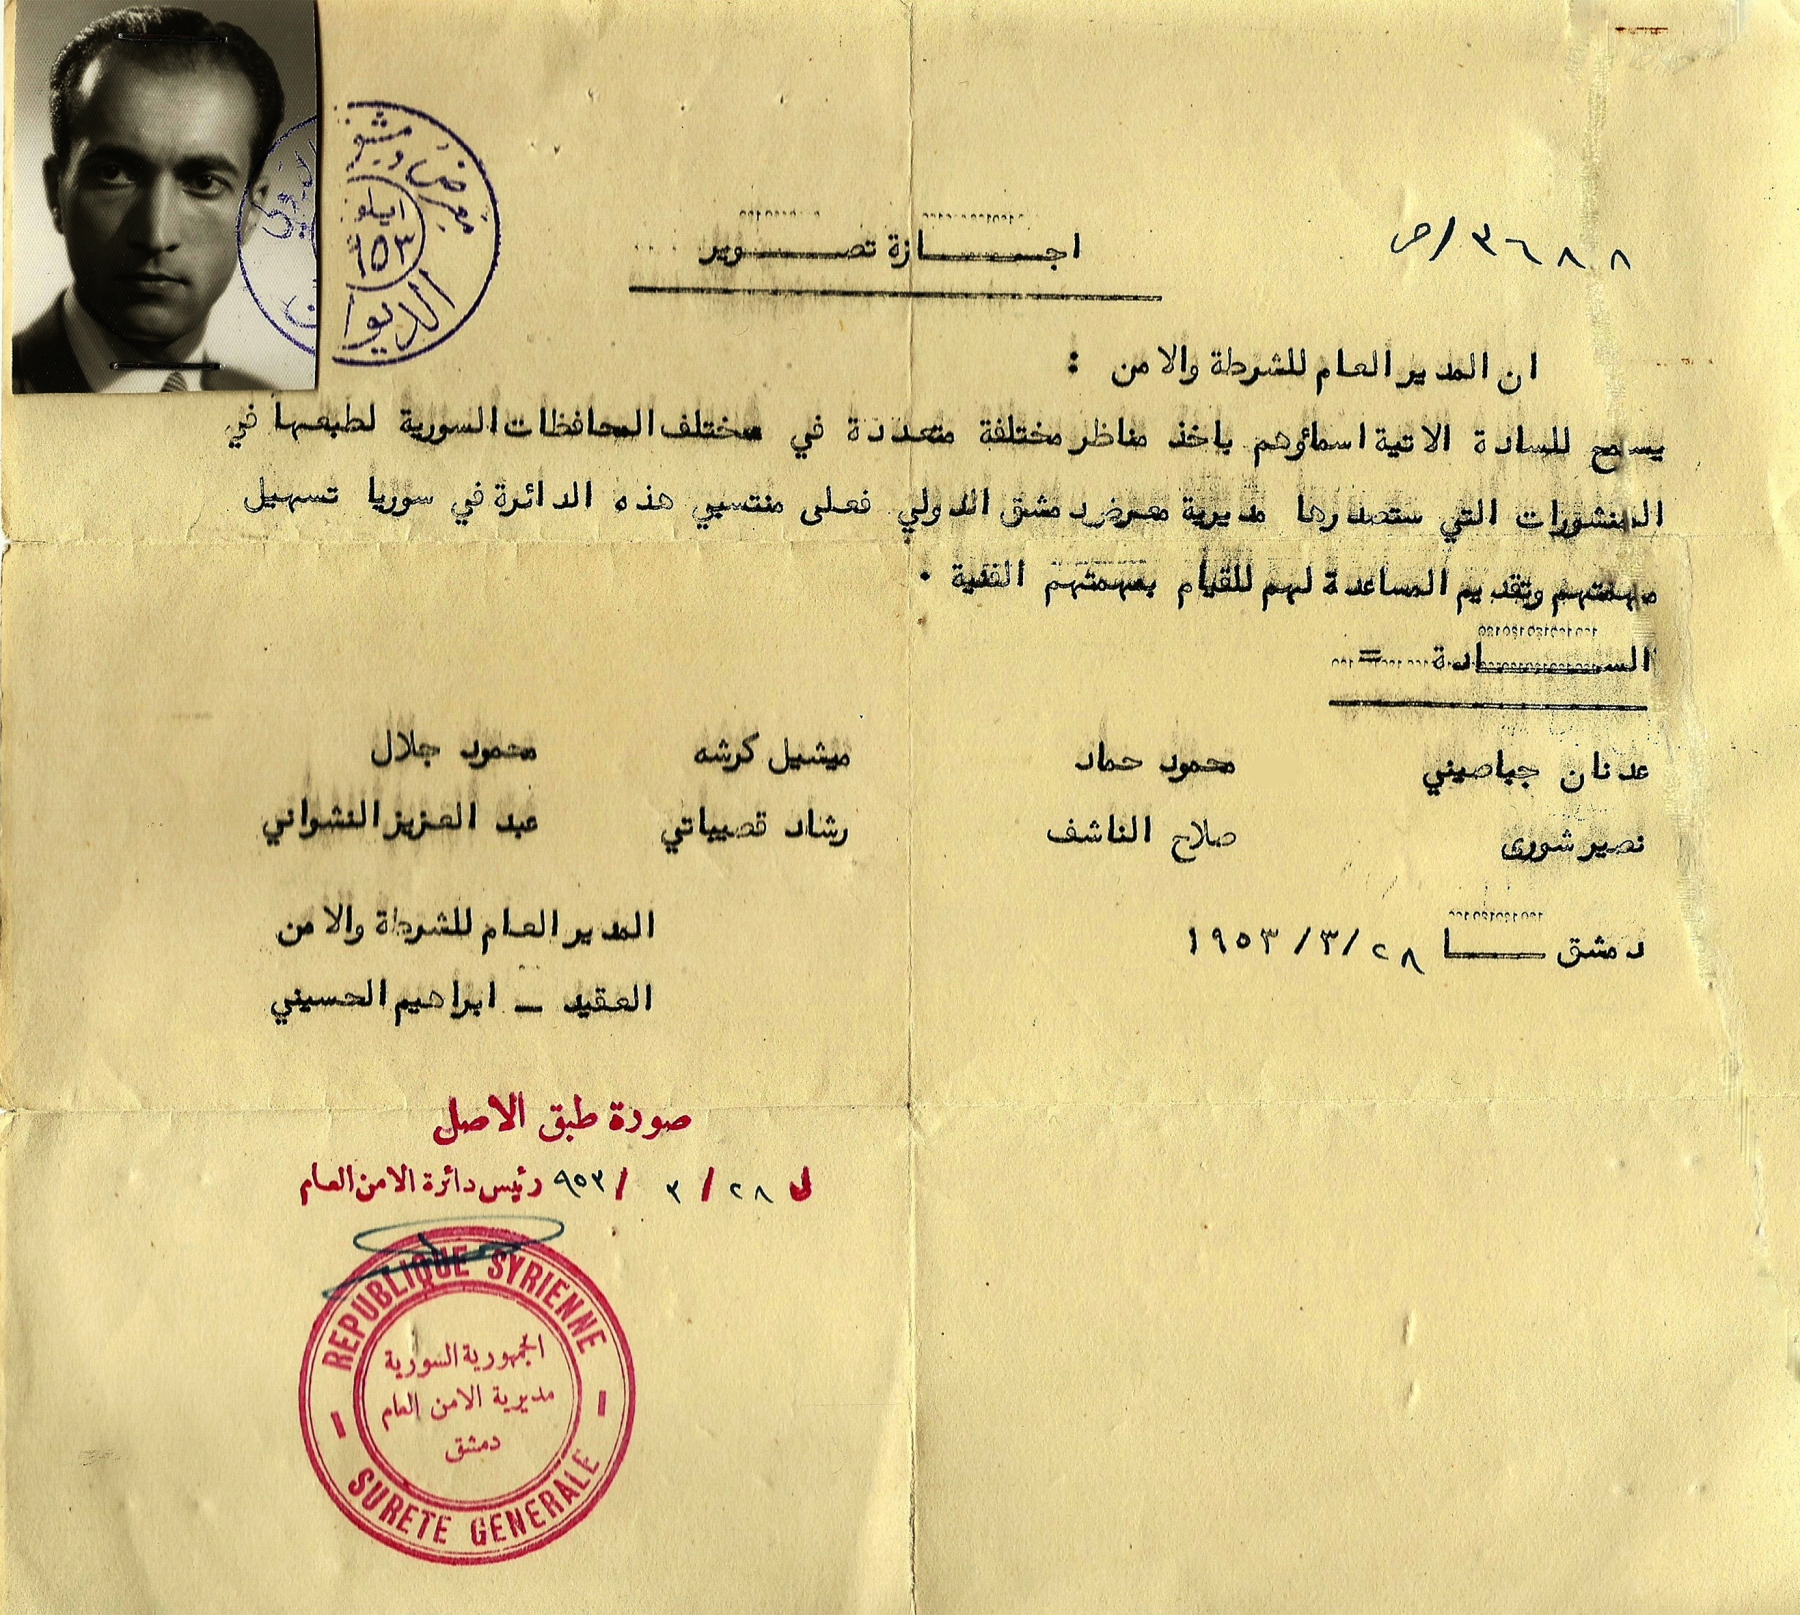 Drawing/Painting permission, issued by Security Department, Damascus, 28 March 1953.